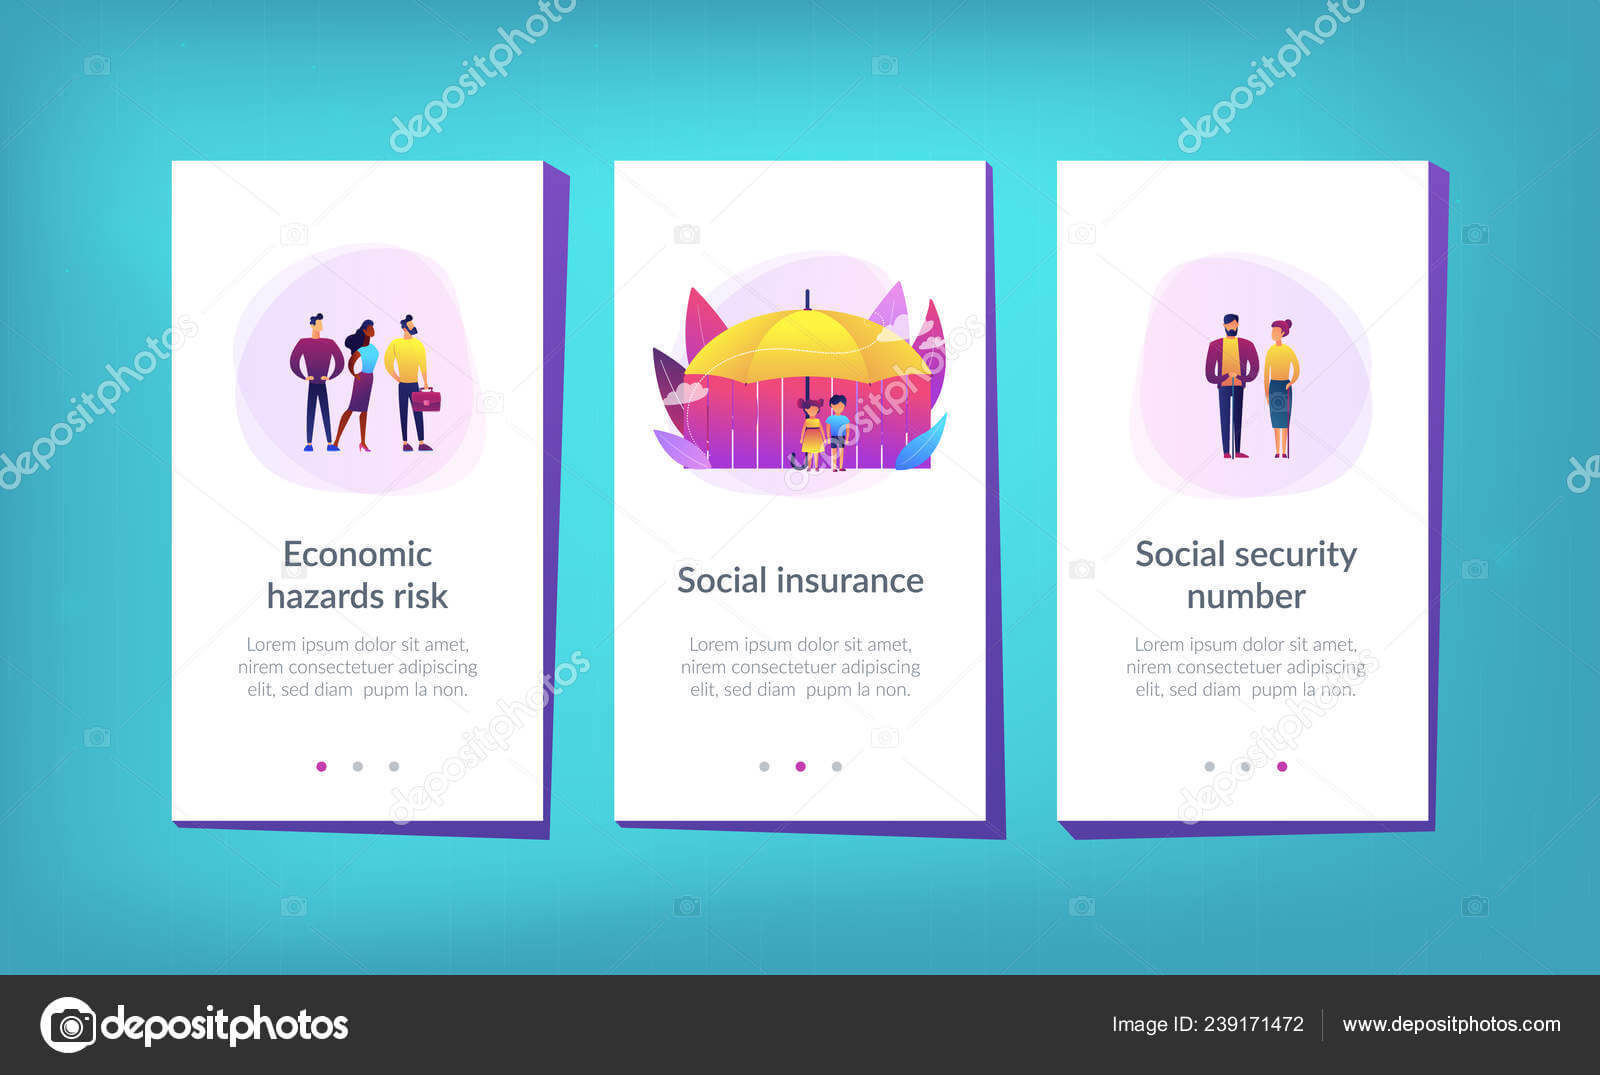 Blank Social Security Card Template | Social Insurance App Intended For Blank Social Security Card Template Download